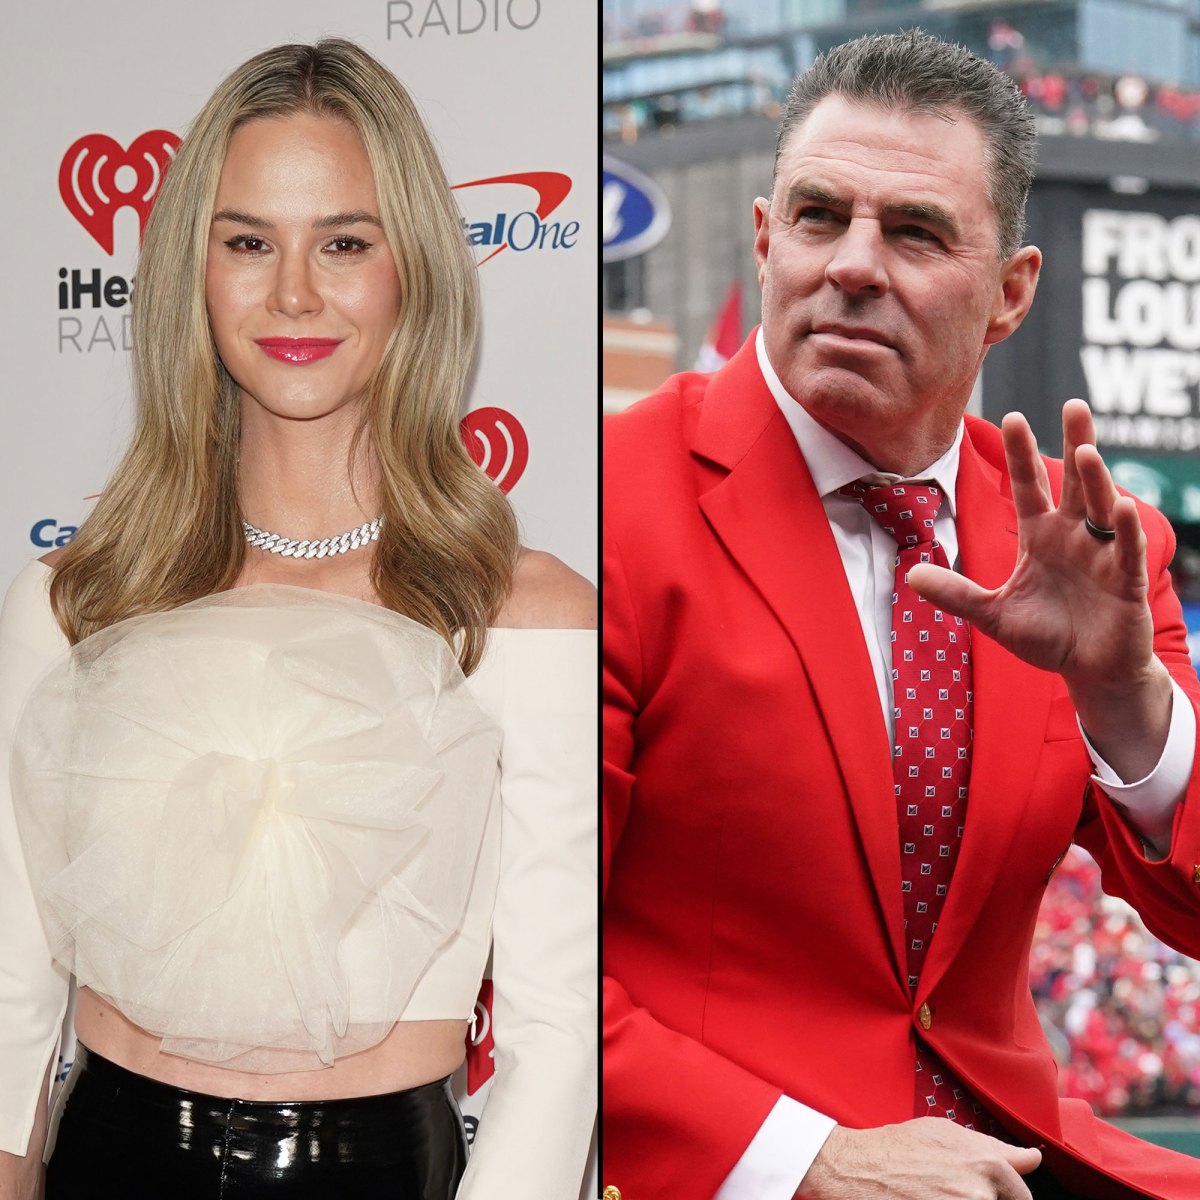 Jim Edmonds officially moves out of home shared with Meghan King Edmonds